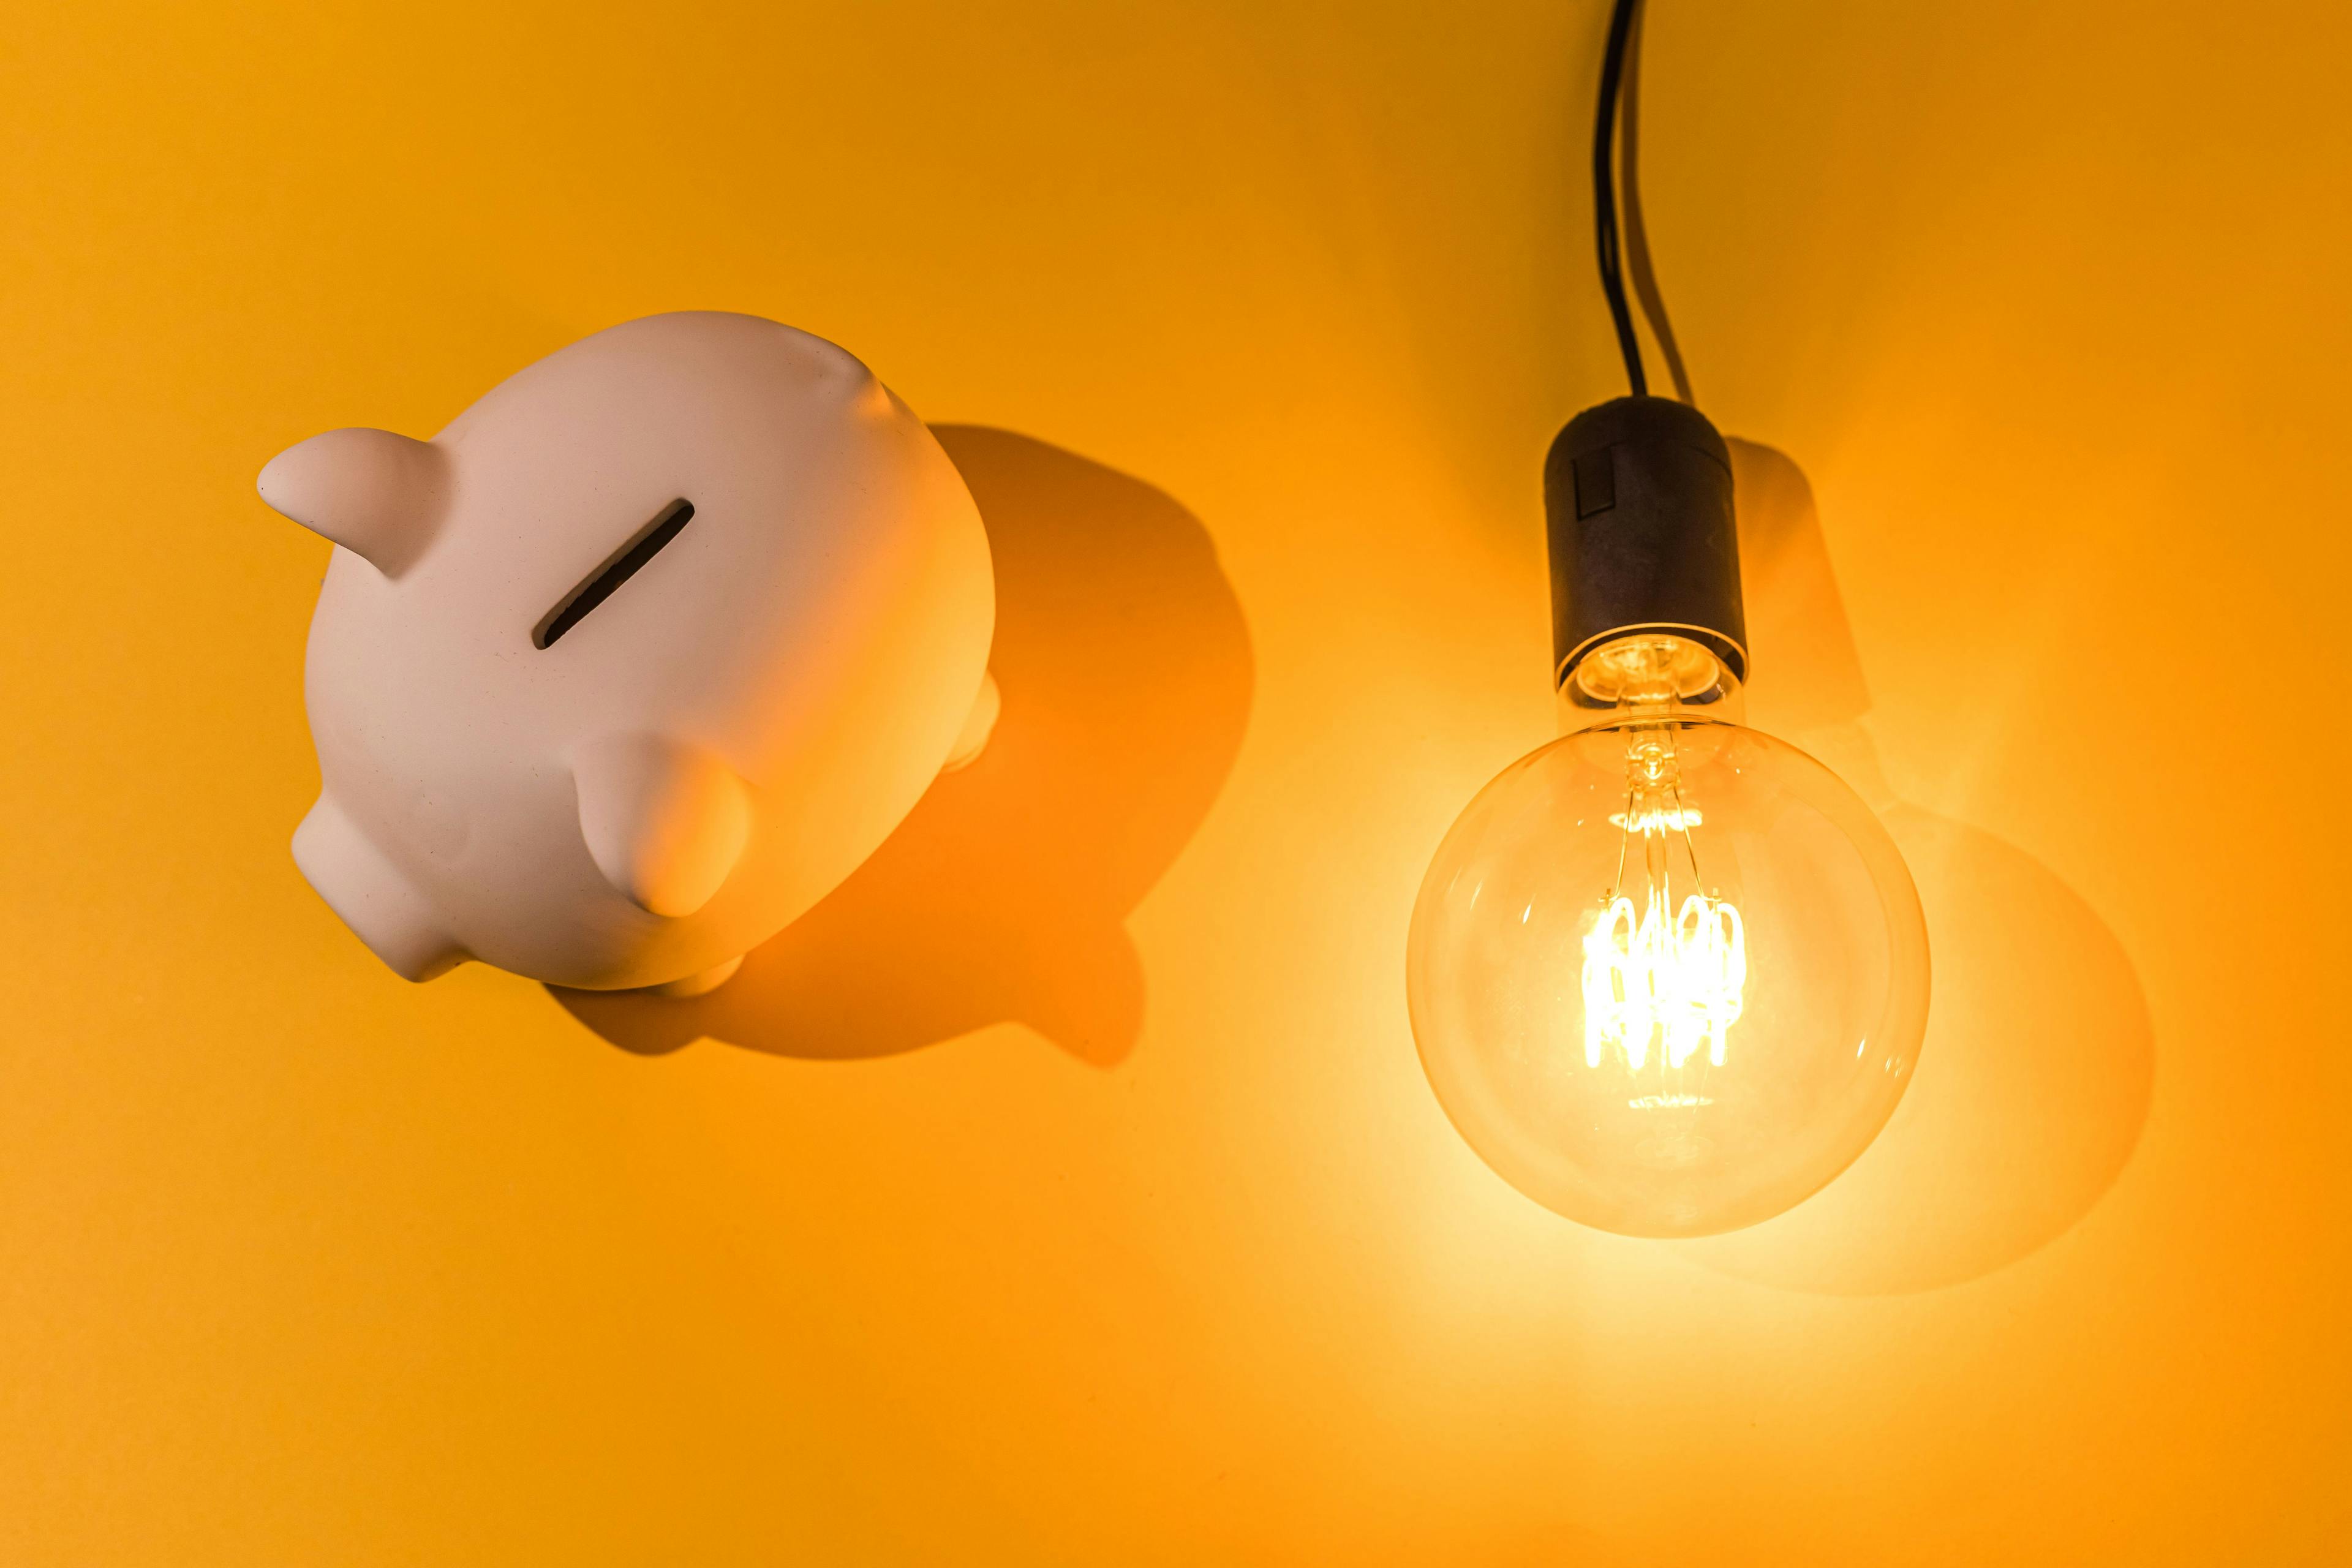 piggy bank next to a light bulb on a yellow background